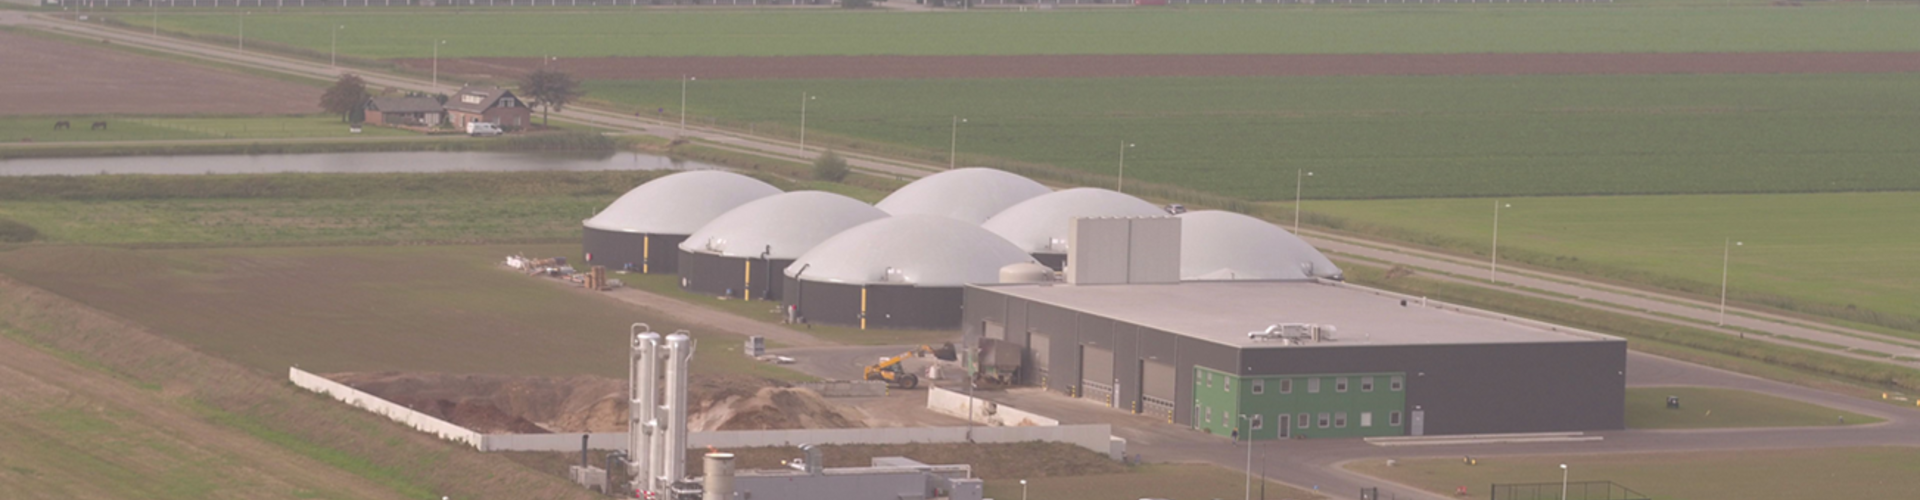 Biogas installation - large scale